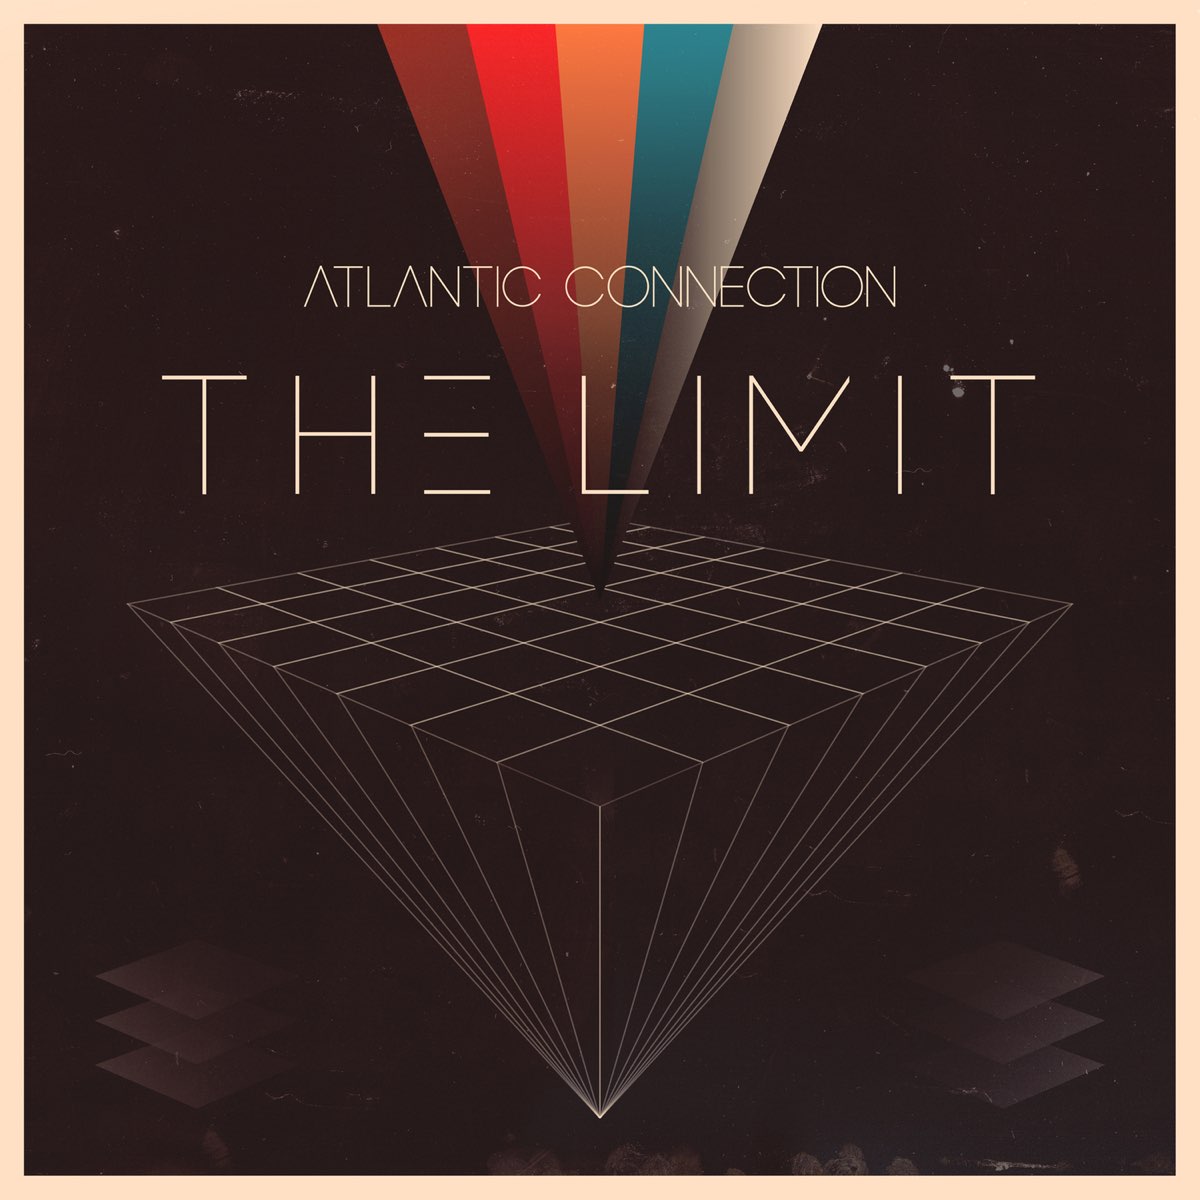 Atlantic connection – Music for travelers Ep. Last connect